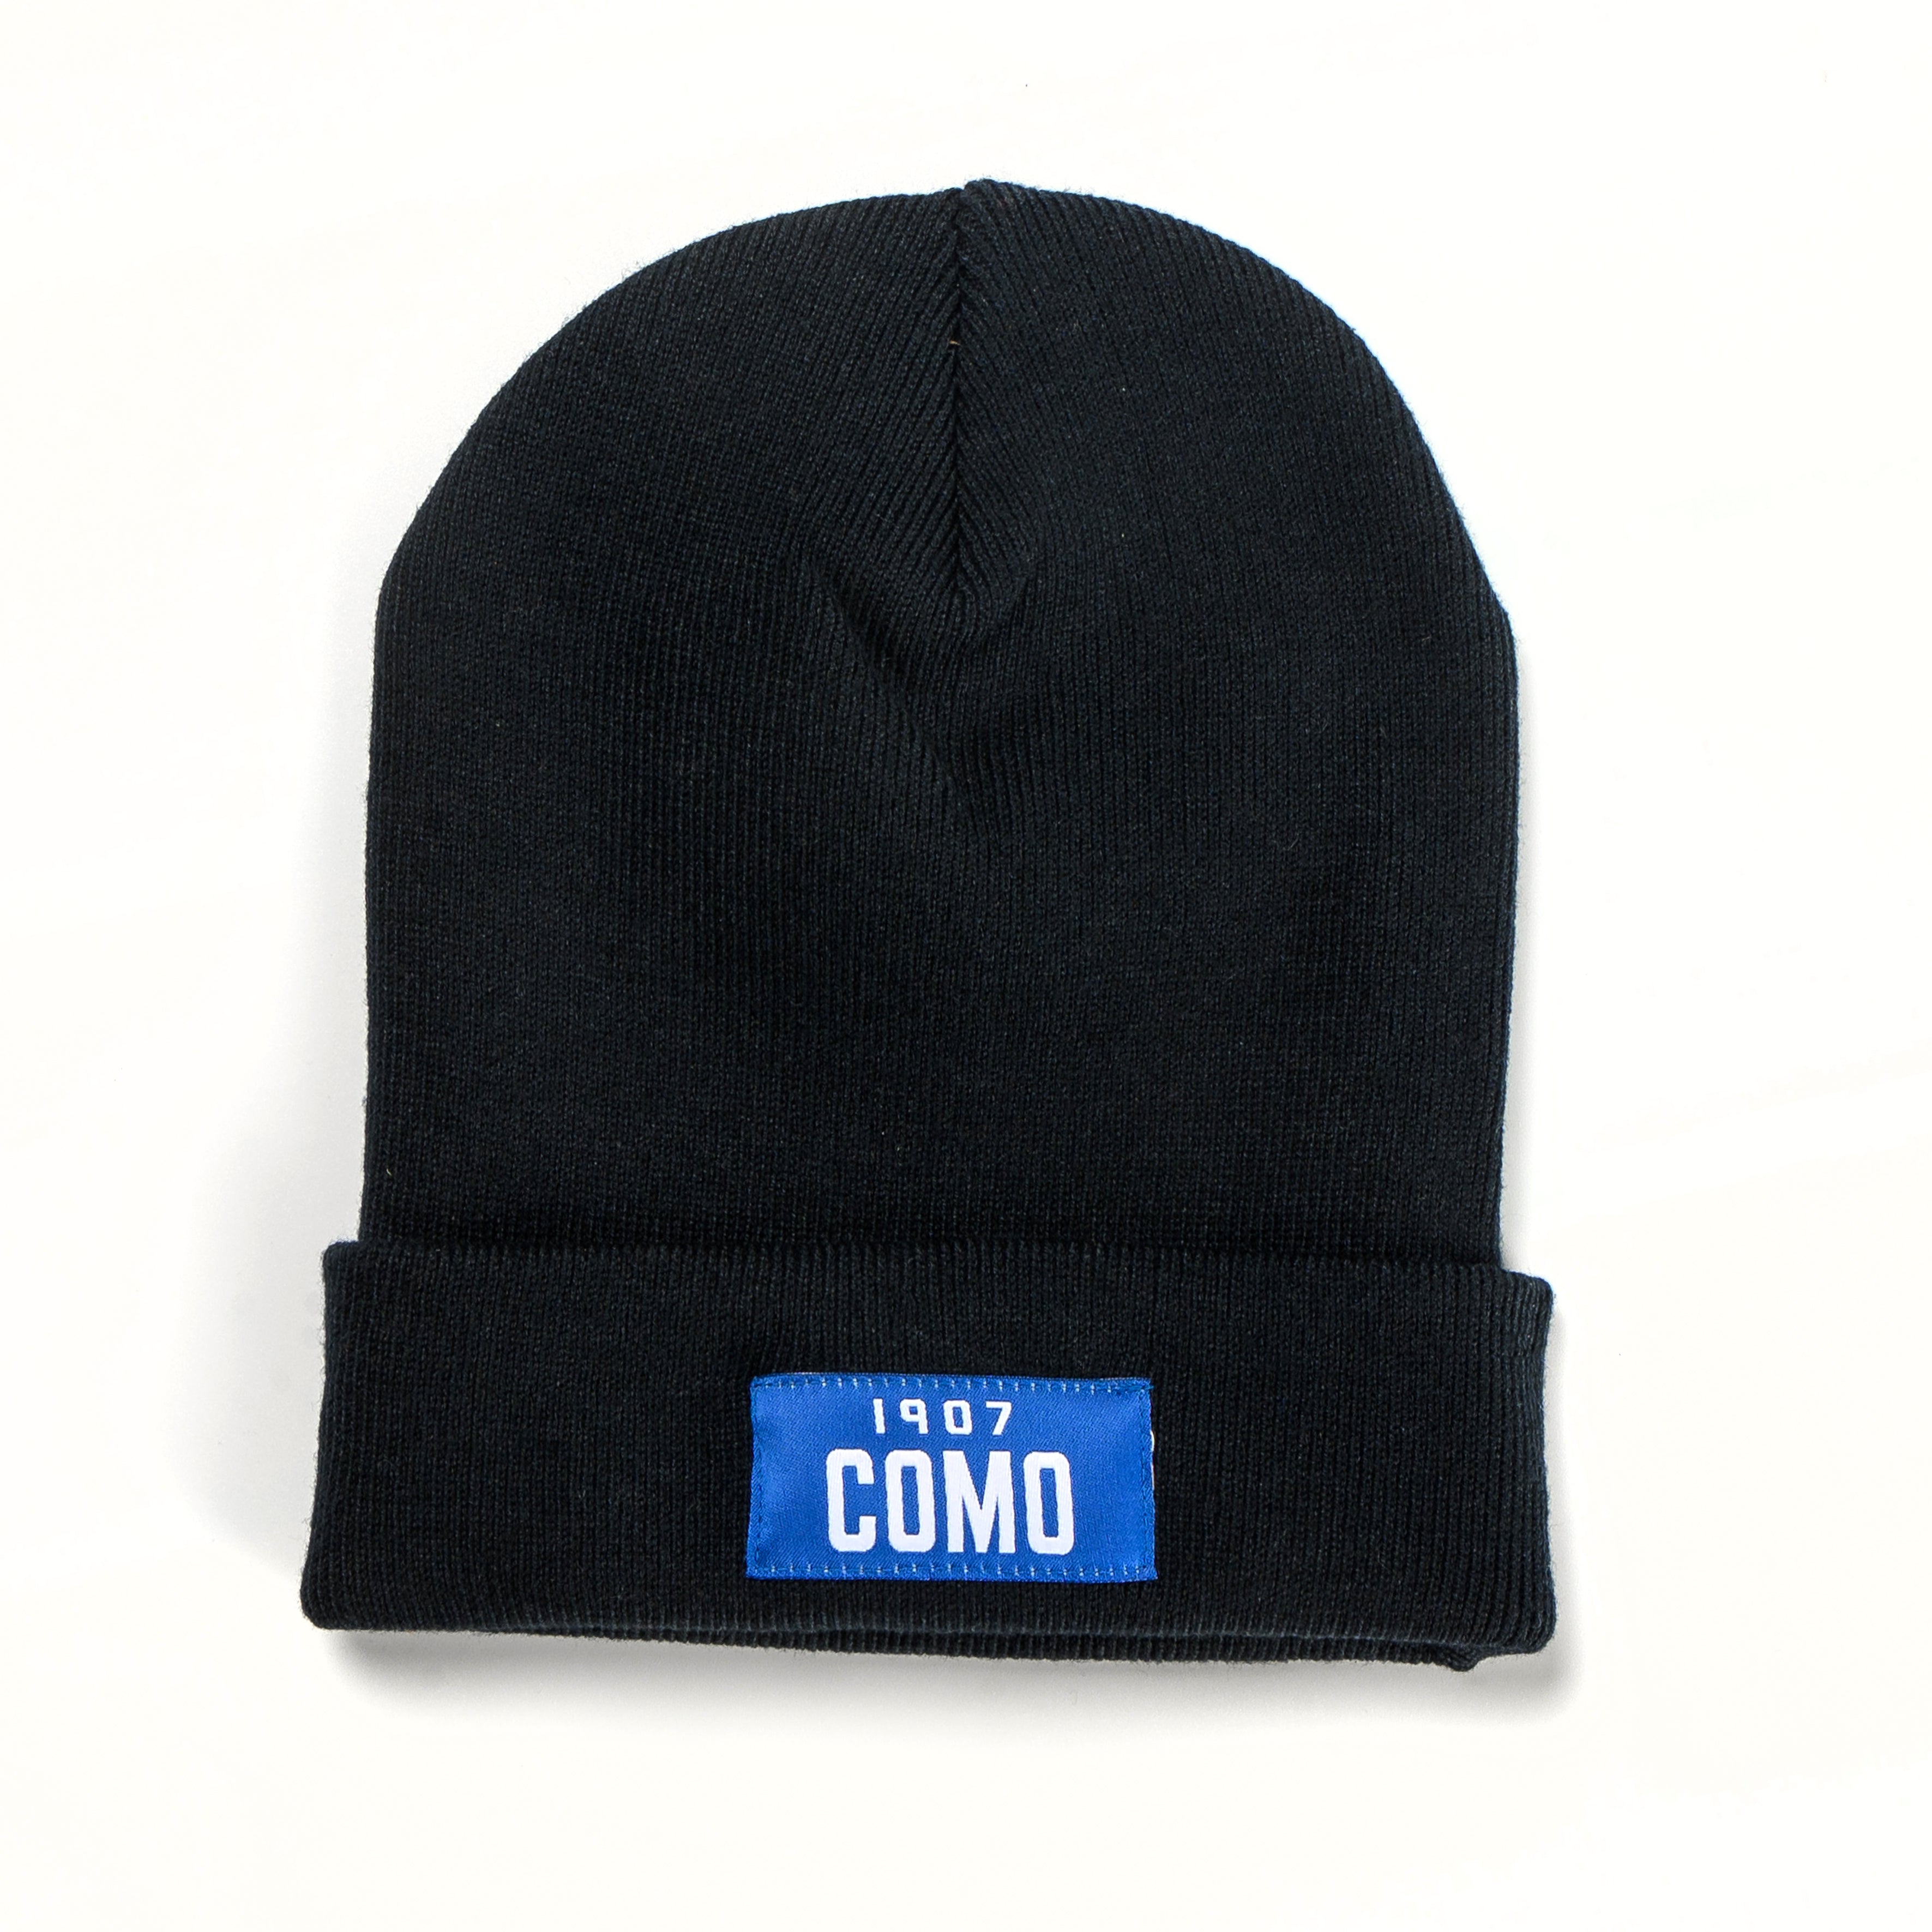 NAVY BEANIE WITH ROYAL DETAIL